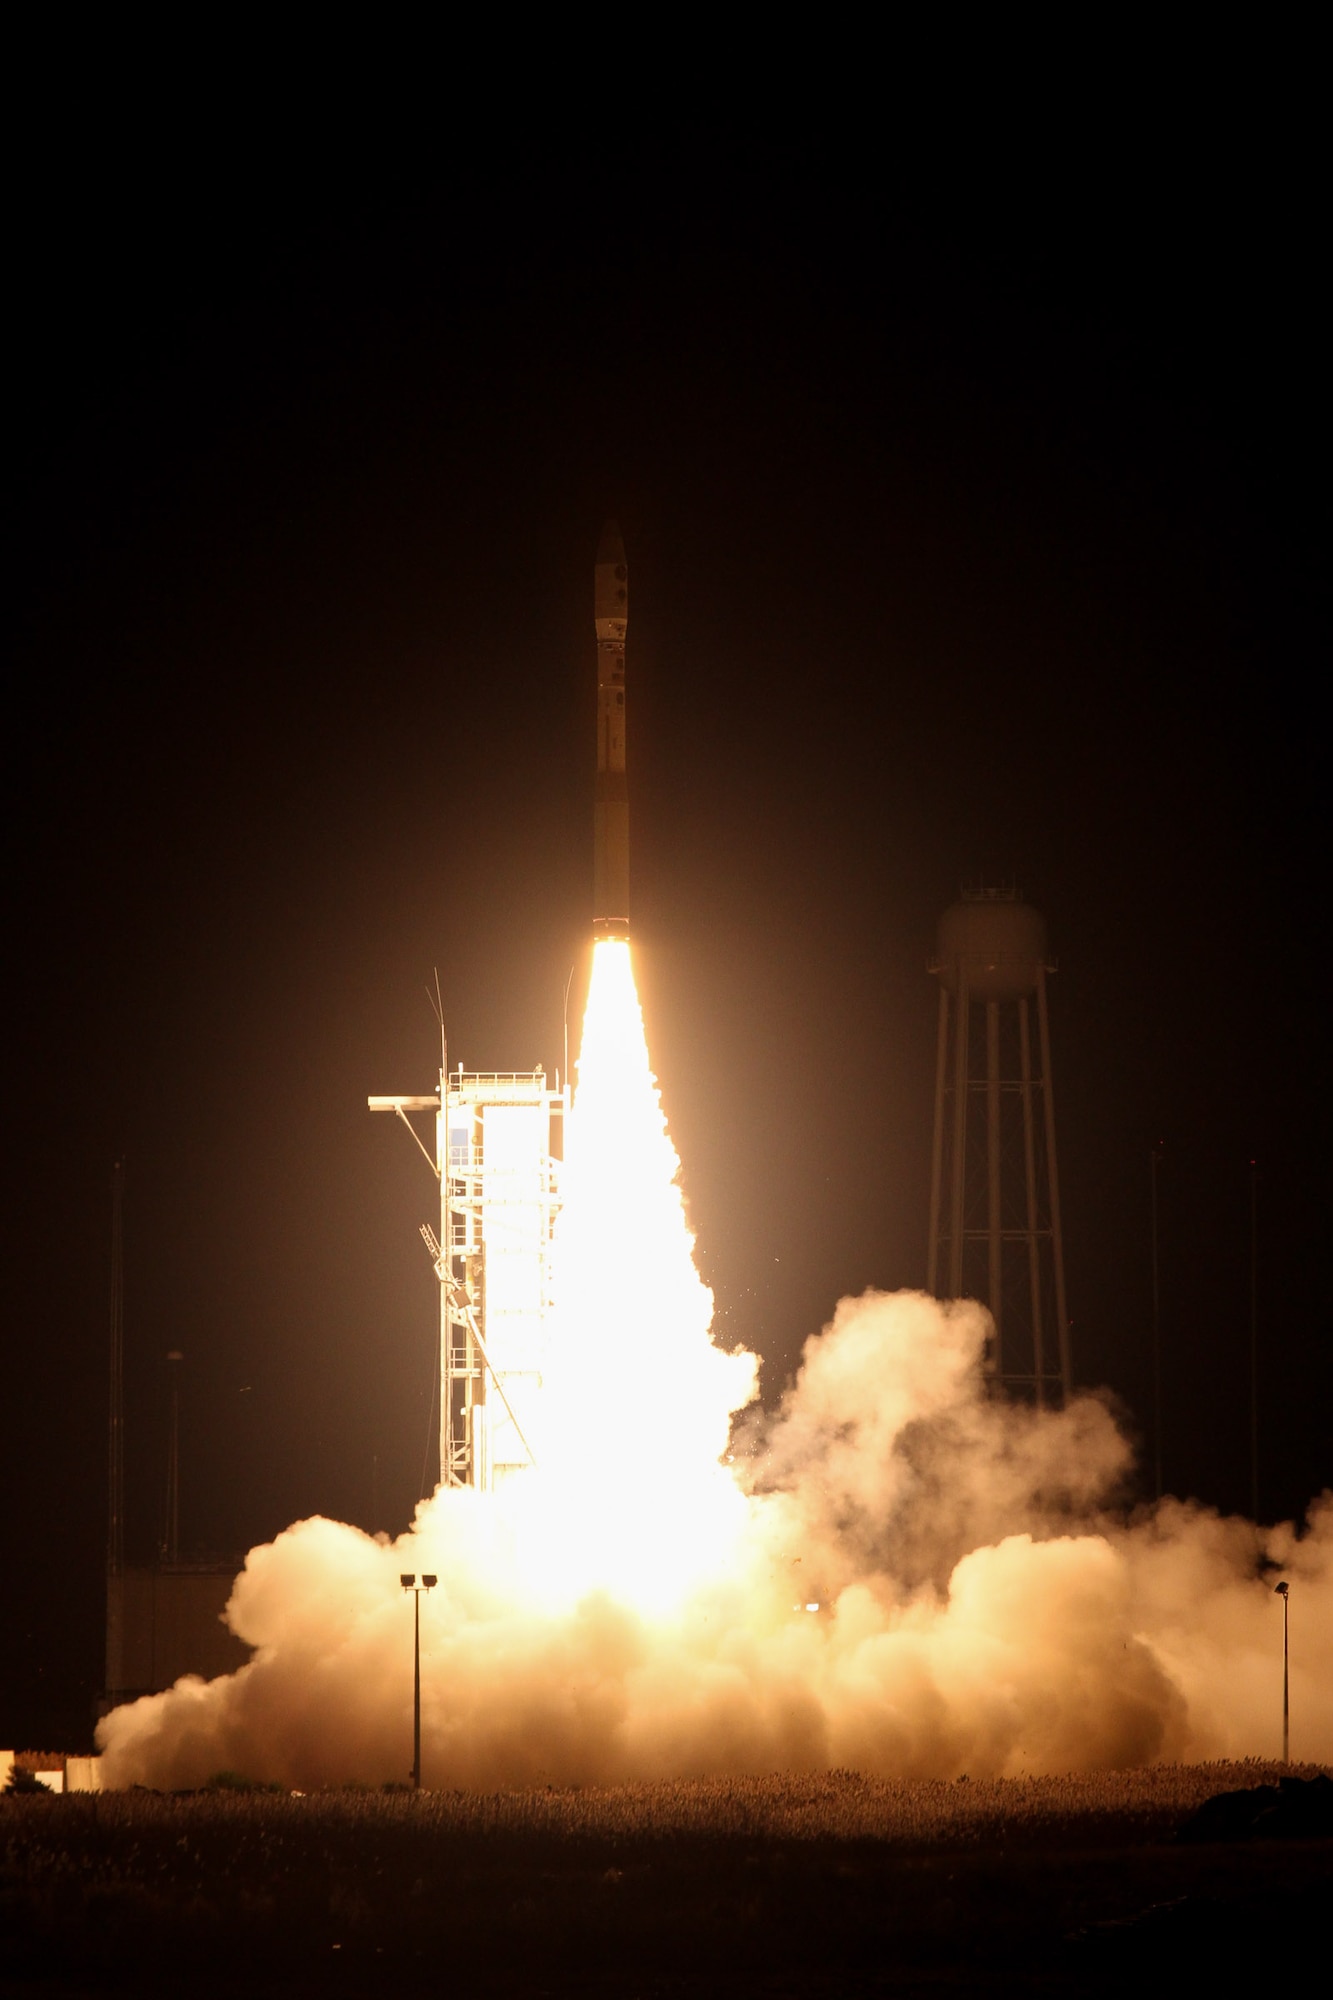 The Air Force Space and Missile Systems Center successfully launched two small satellites into orbit Nov. 19 from Wallops Island, Va., on the ORS-3 Enabler mission. (Courtesy photo)